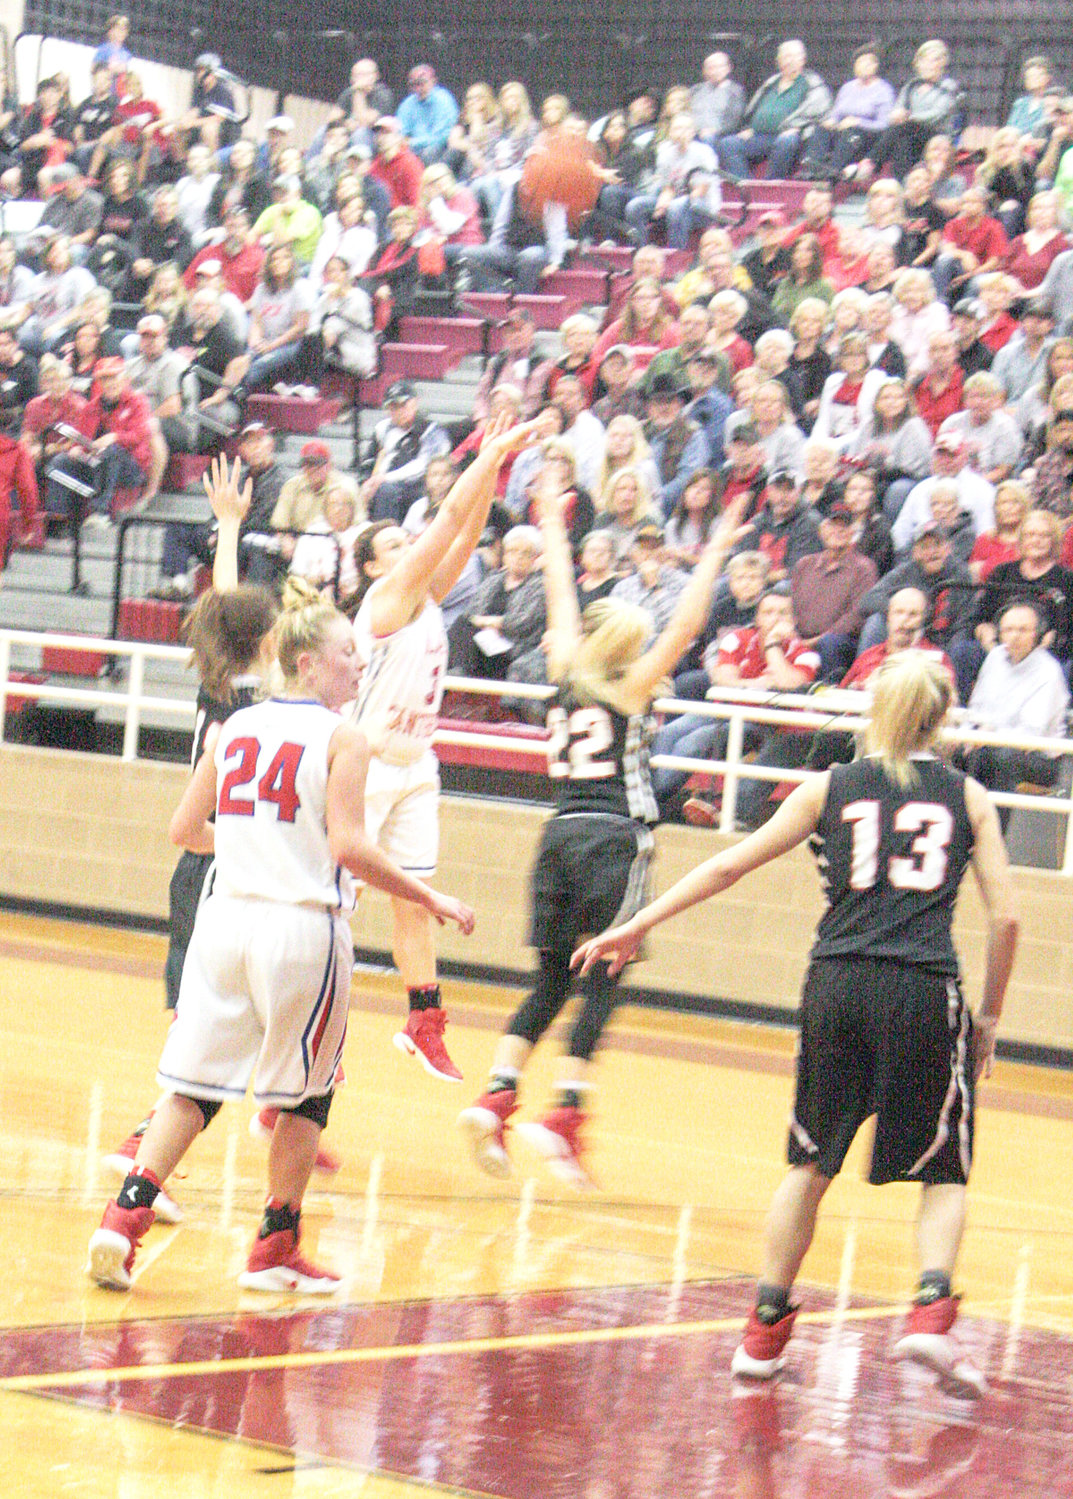 Shelby Wright (3) launches a long-range bomb for Alba-Golden’s only successful three-point shot of the night with 37 seconds left to play in the Regional Semifinal game with Winnsboro Friday night. That bucket cut Winnsboro’s lead to three points, 53-50. However, it was too little, too late and the Lady Panthers fell 56-50 to be eliminated from the playoffs.